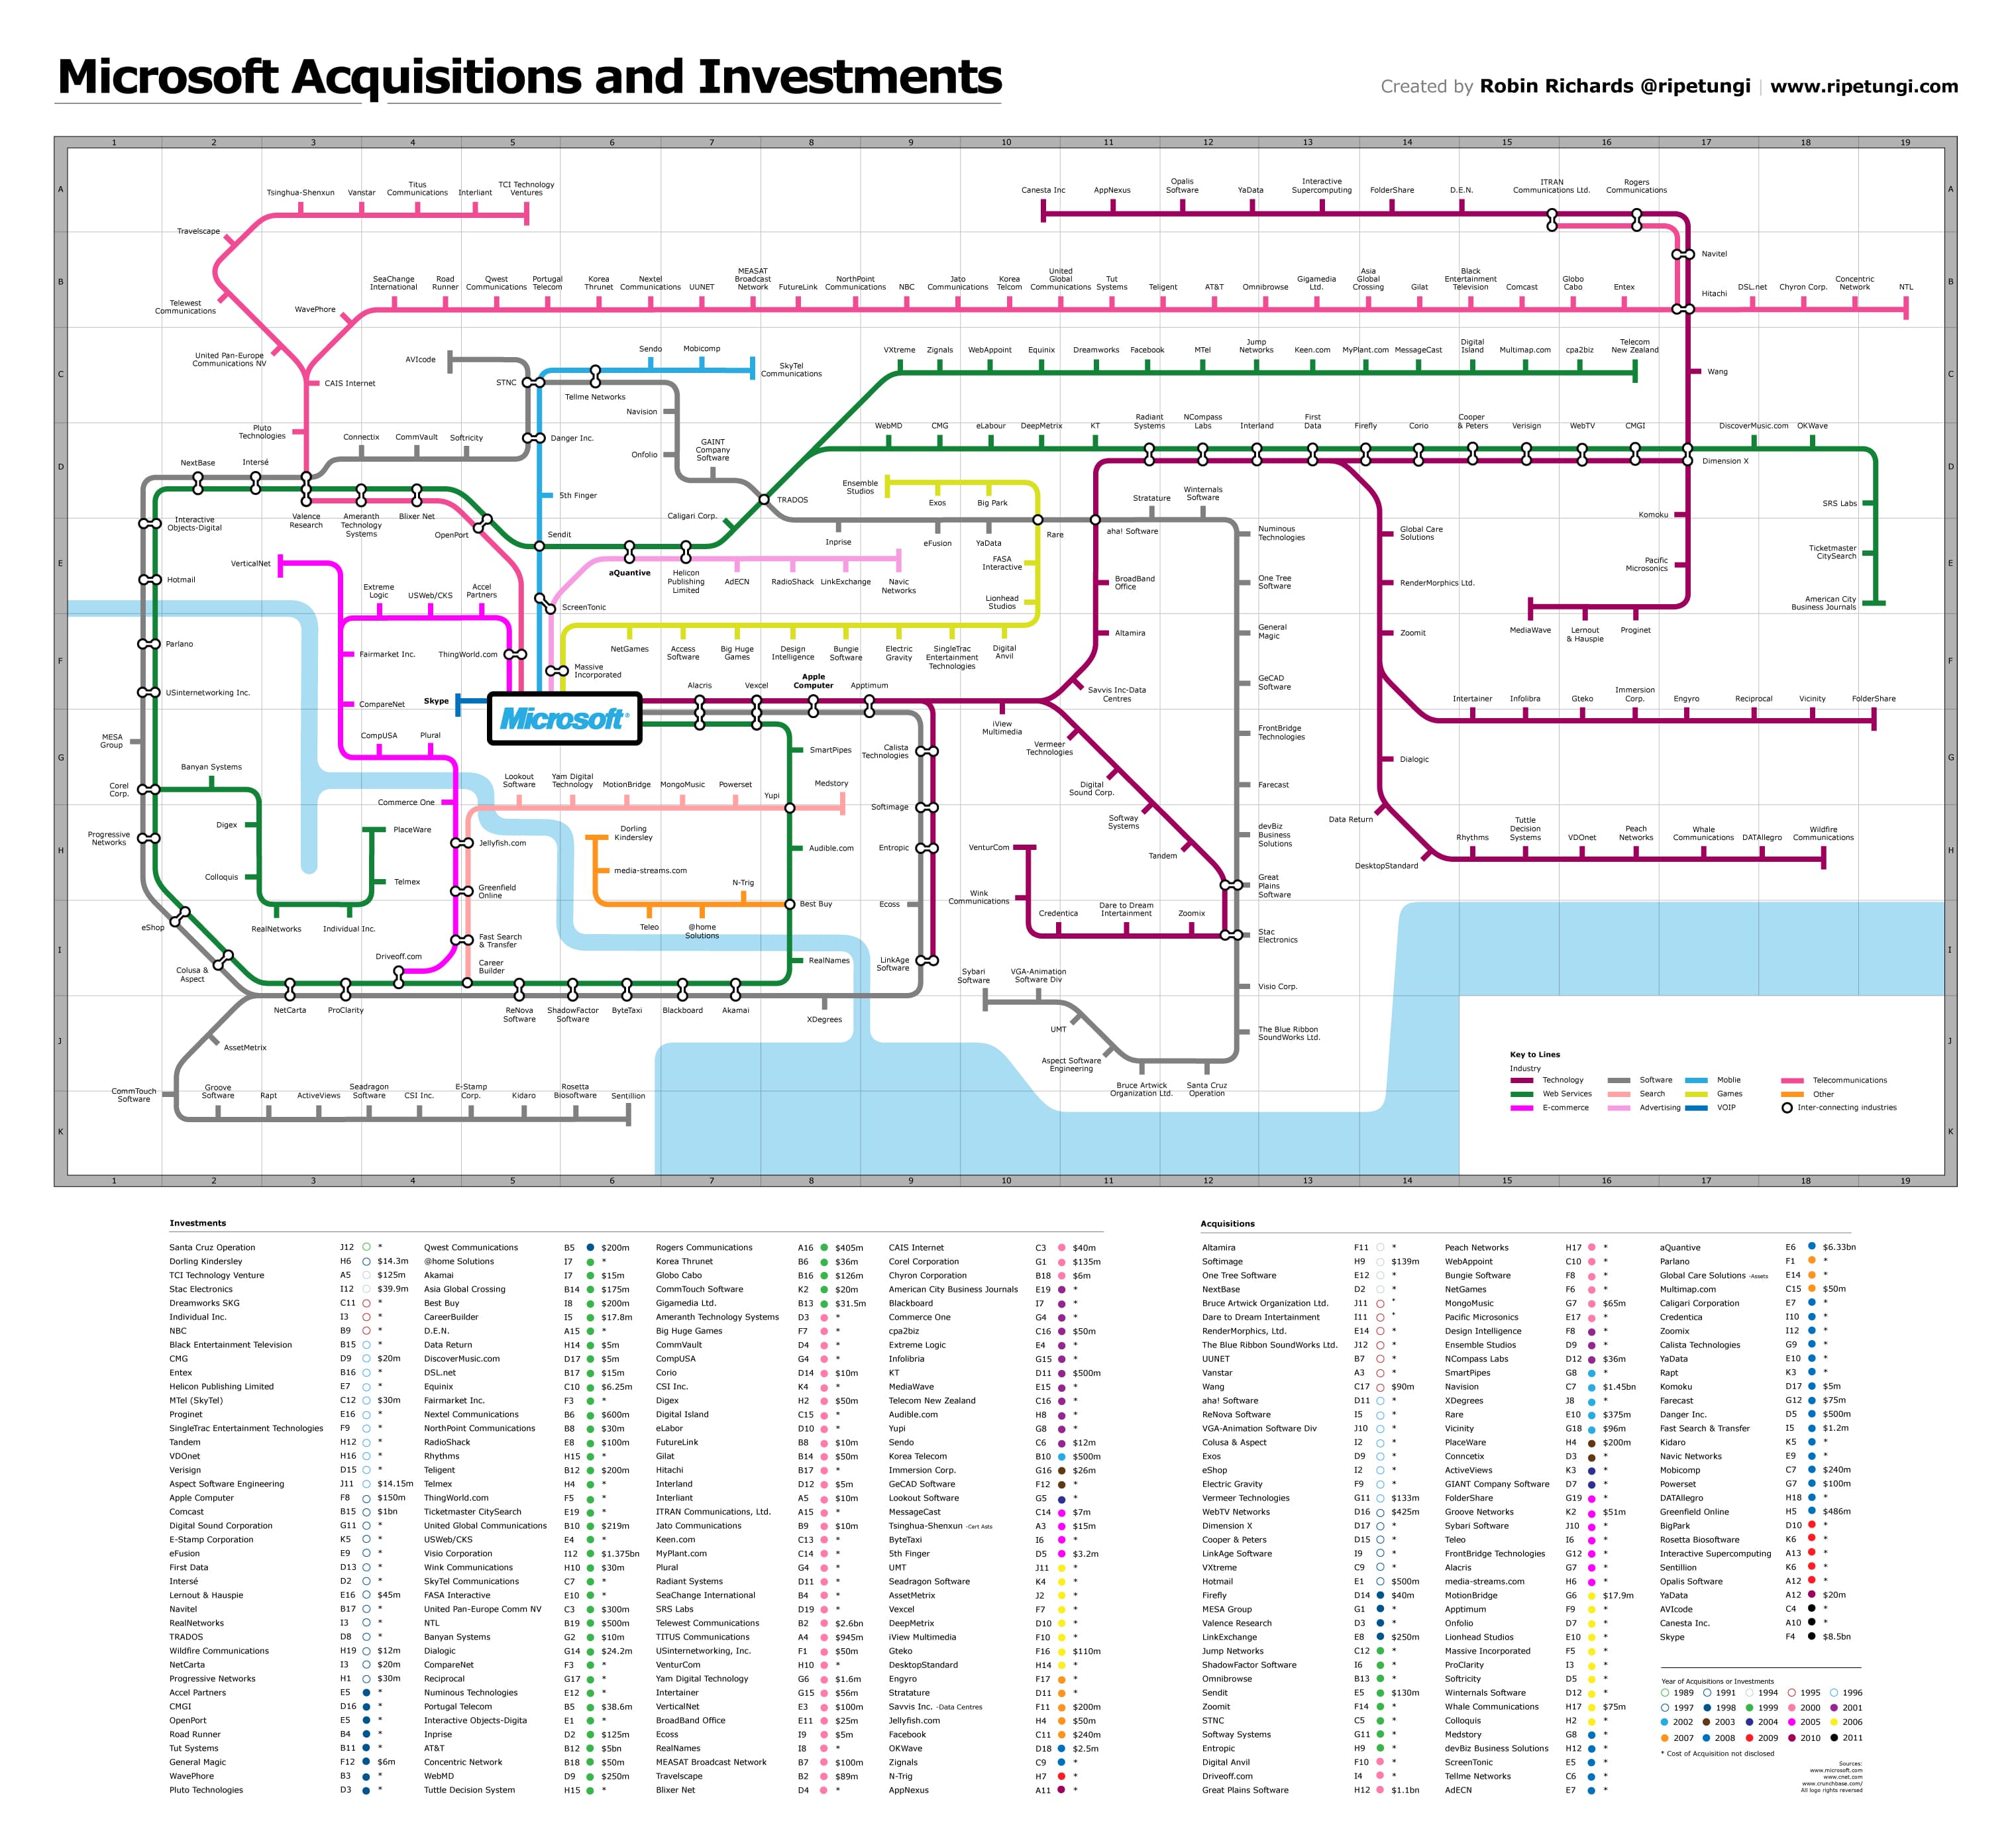 Every Company Microsoft Ever Invested In [Infographic]